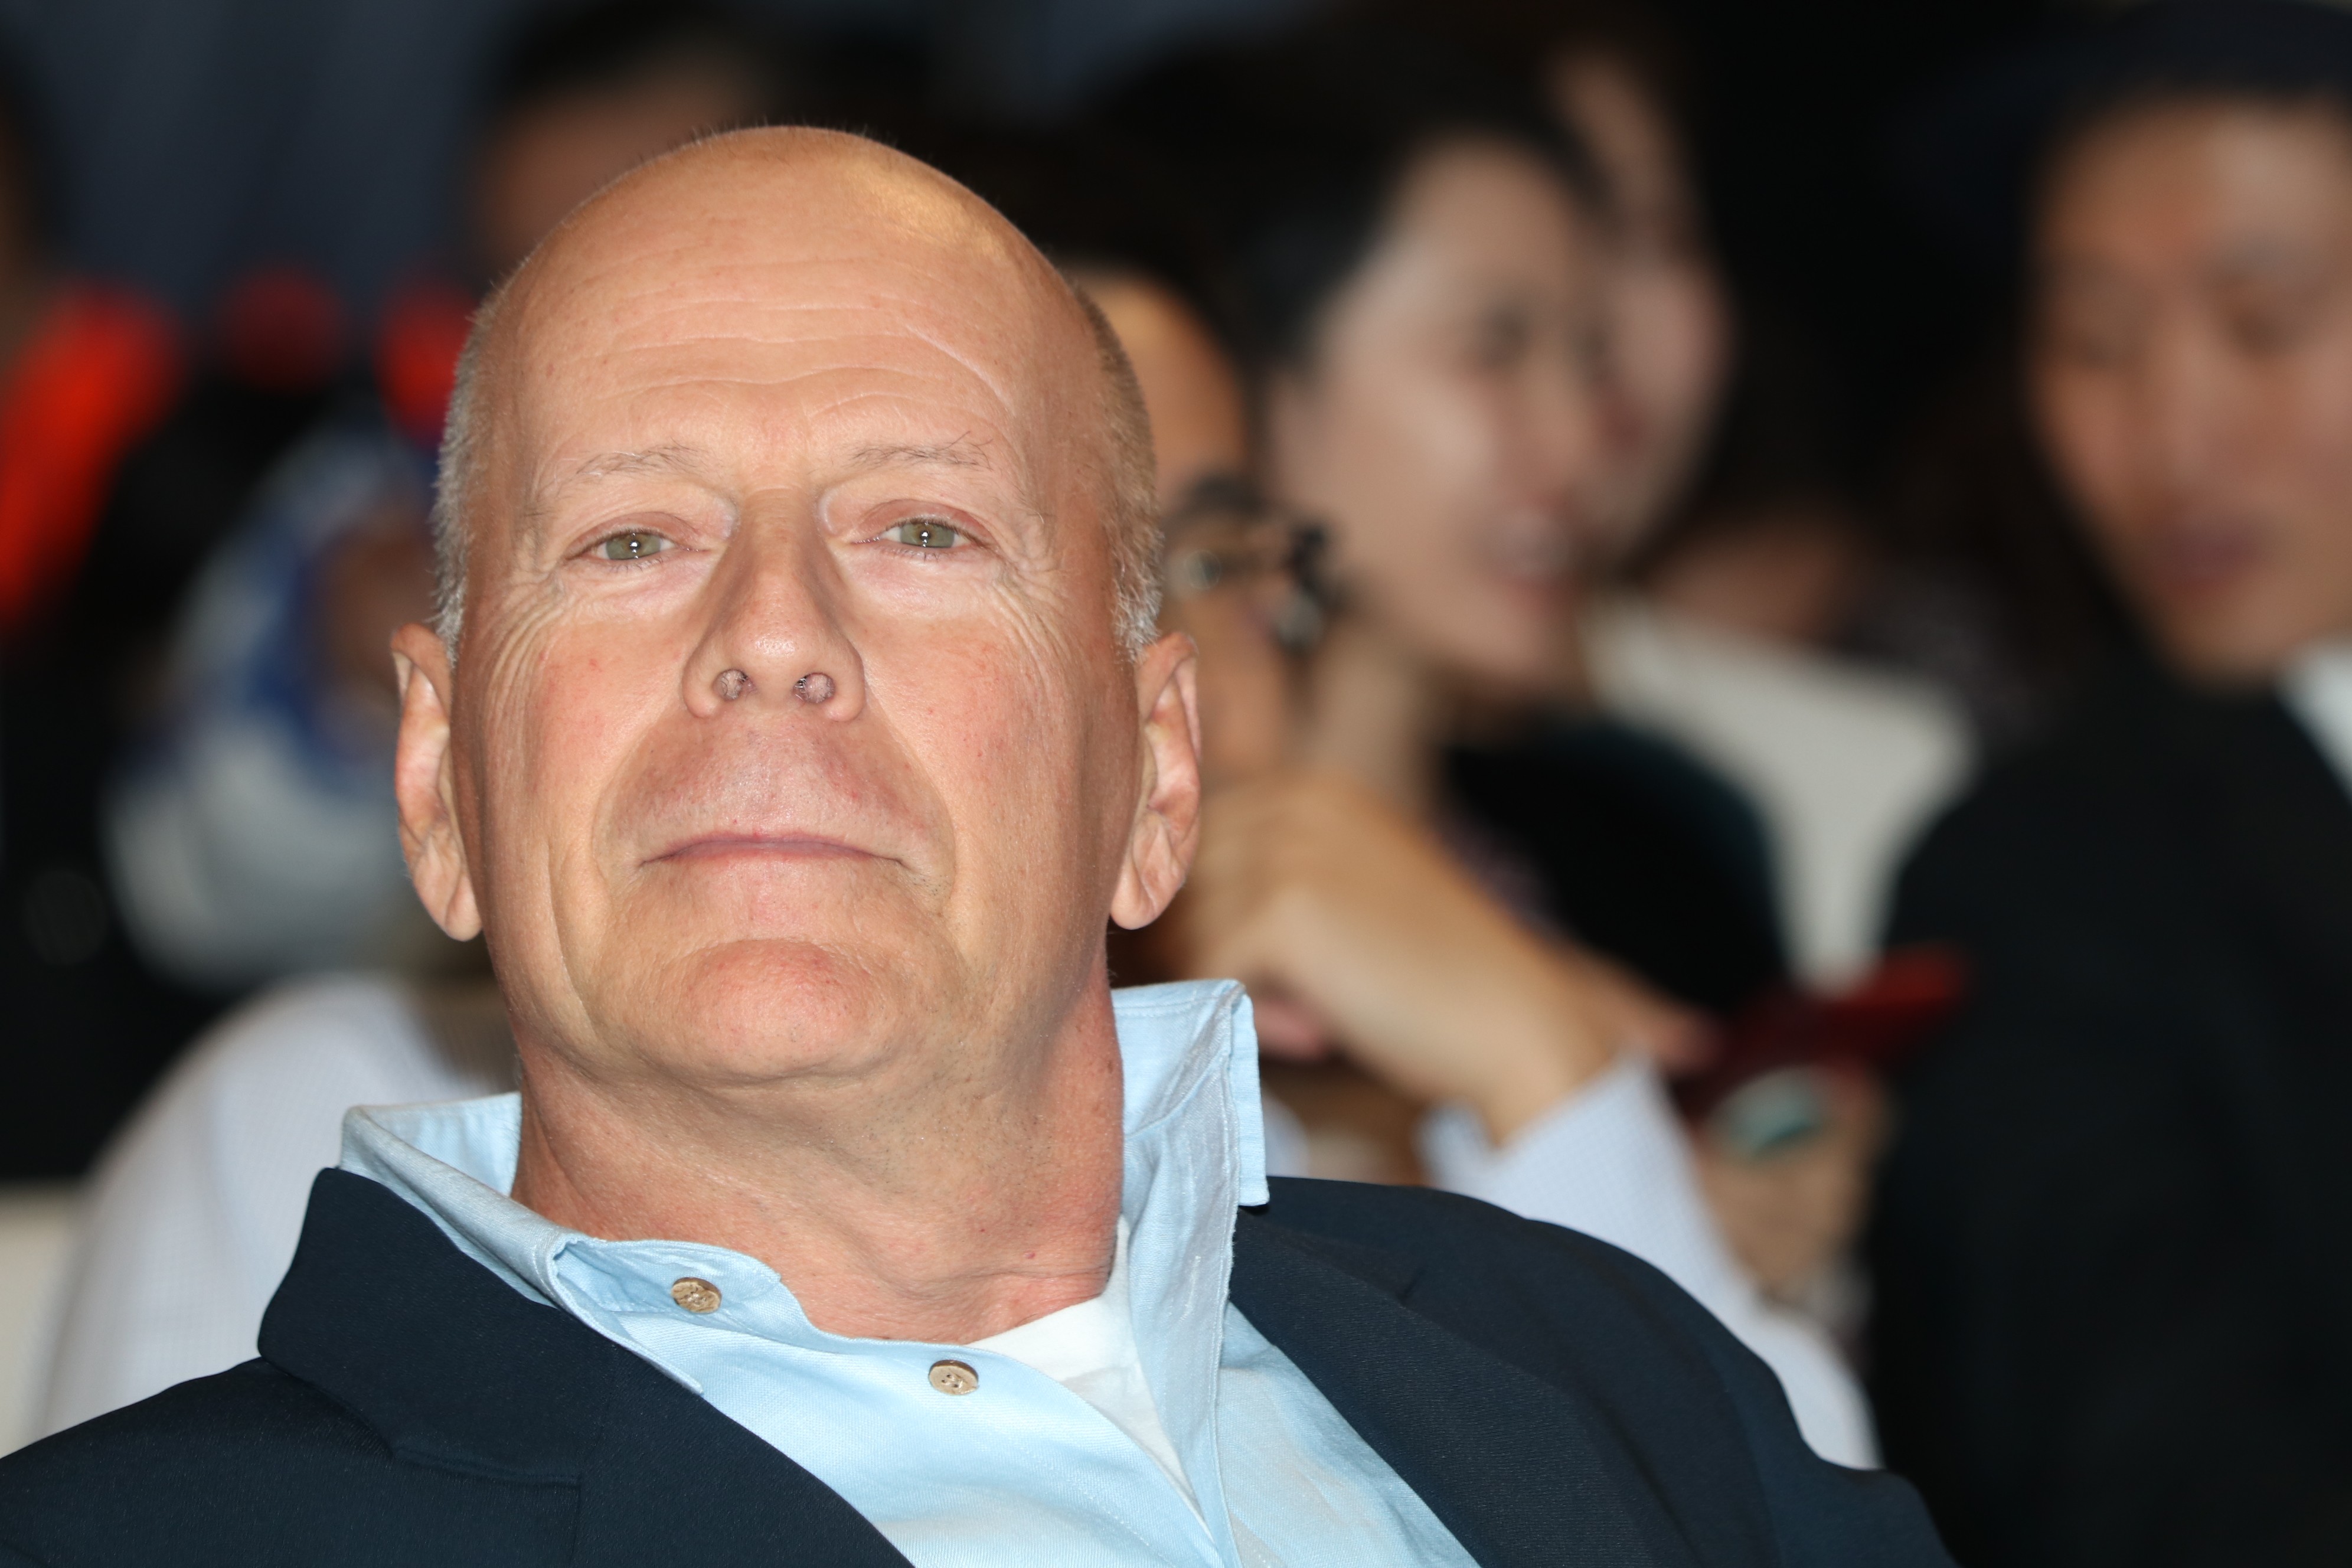 O ator Bruce Willis (Foto: Getty Images)